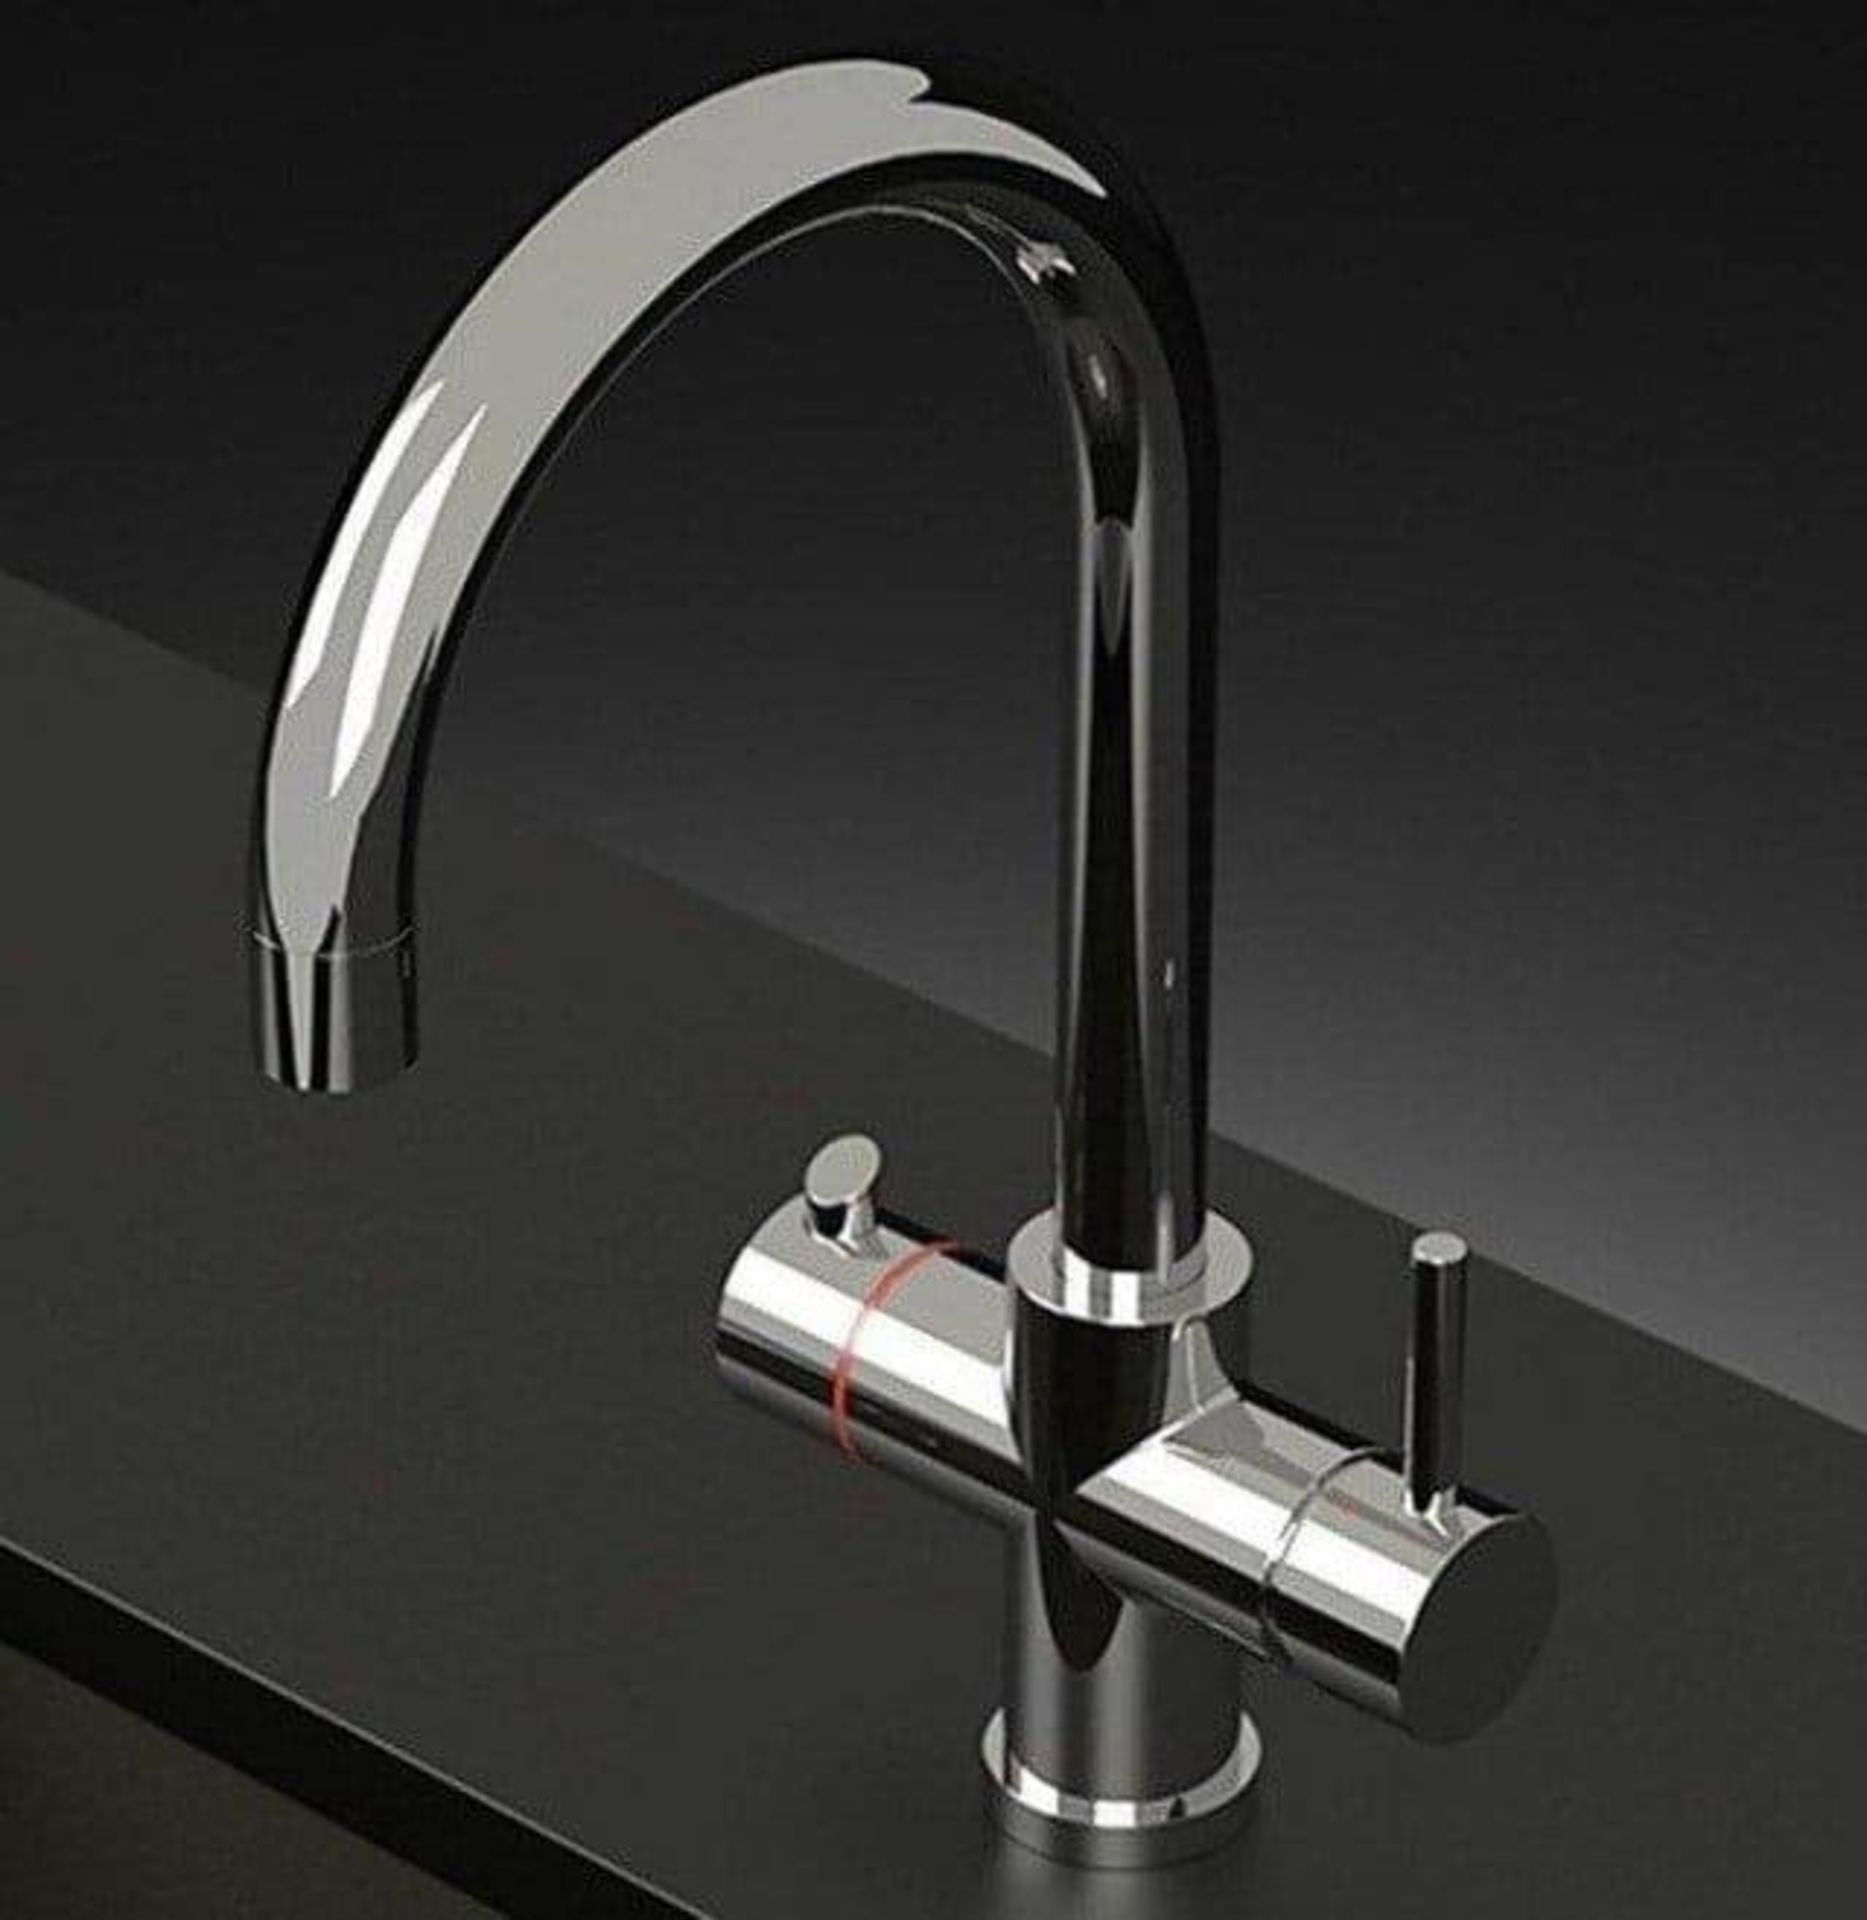 Astra cast Curve boiling hotwater, kitchen sinkmixer, tap